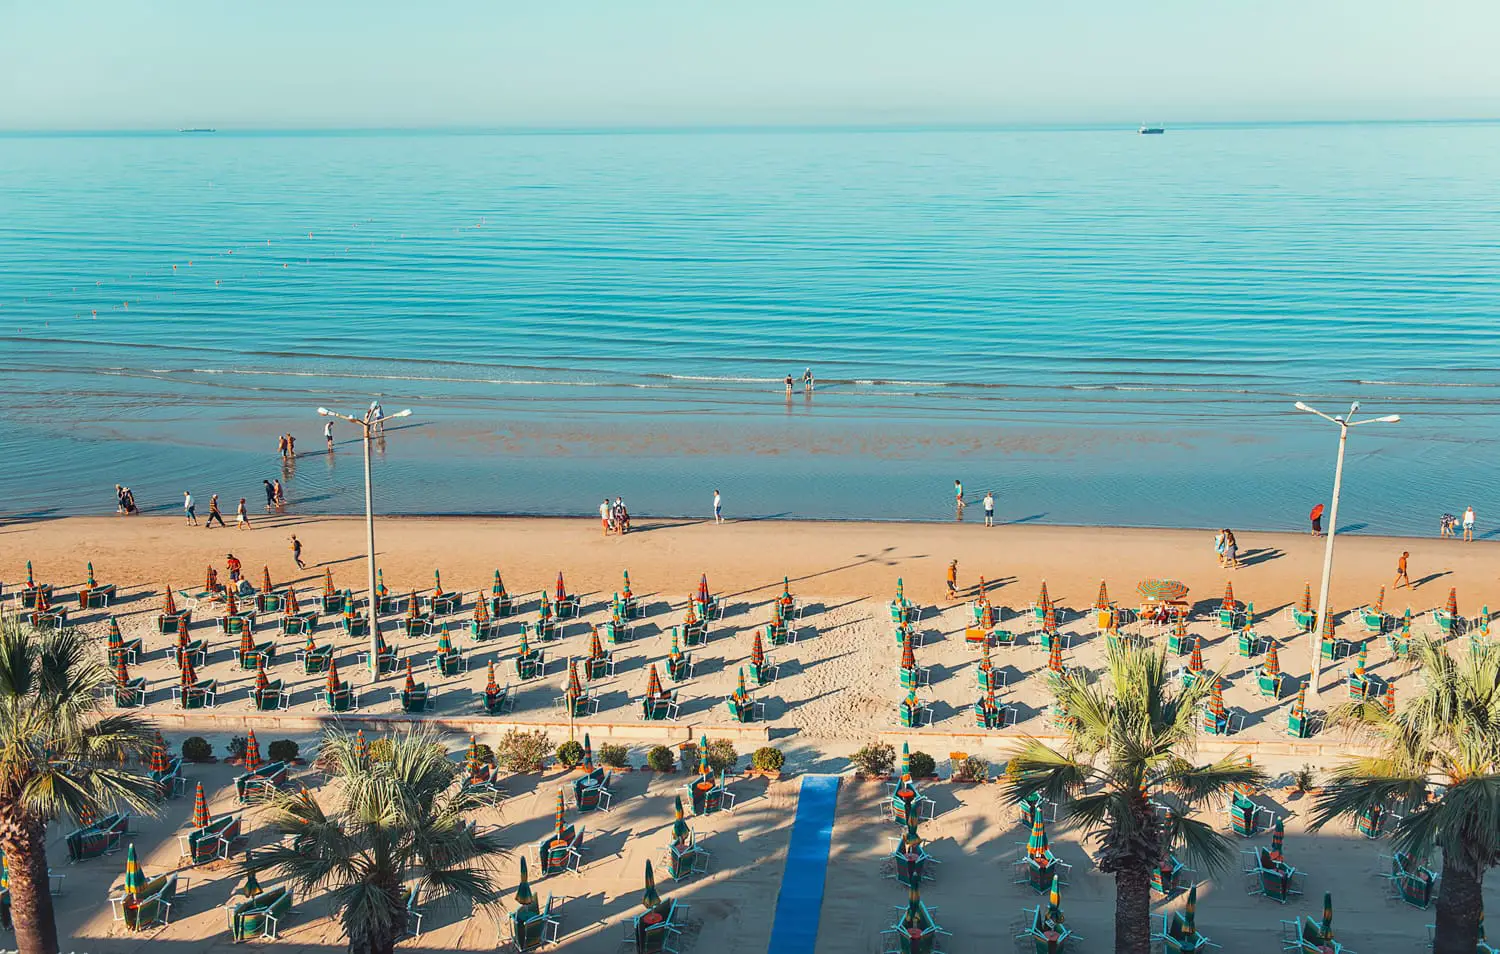 Sandy beach of Durres on the Adriatic seaside of Albania captured early morning in summer.